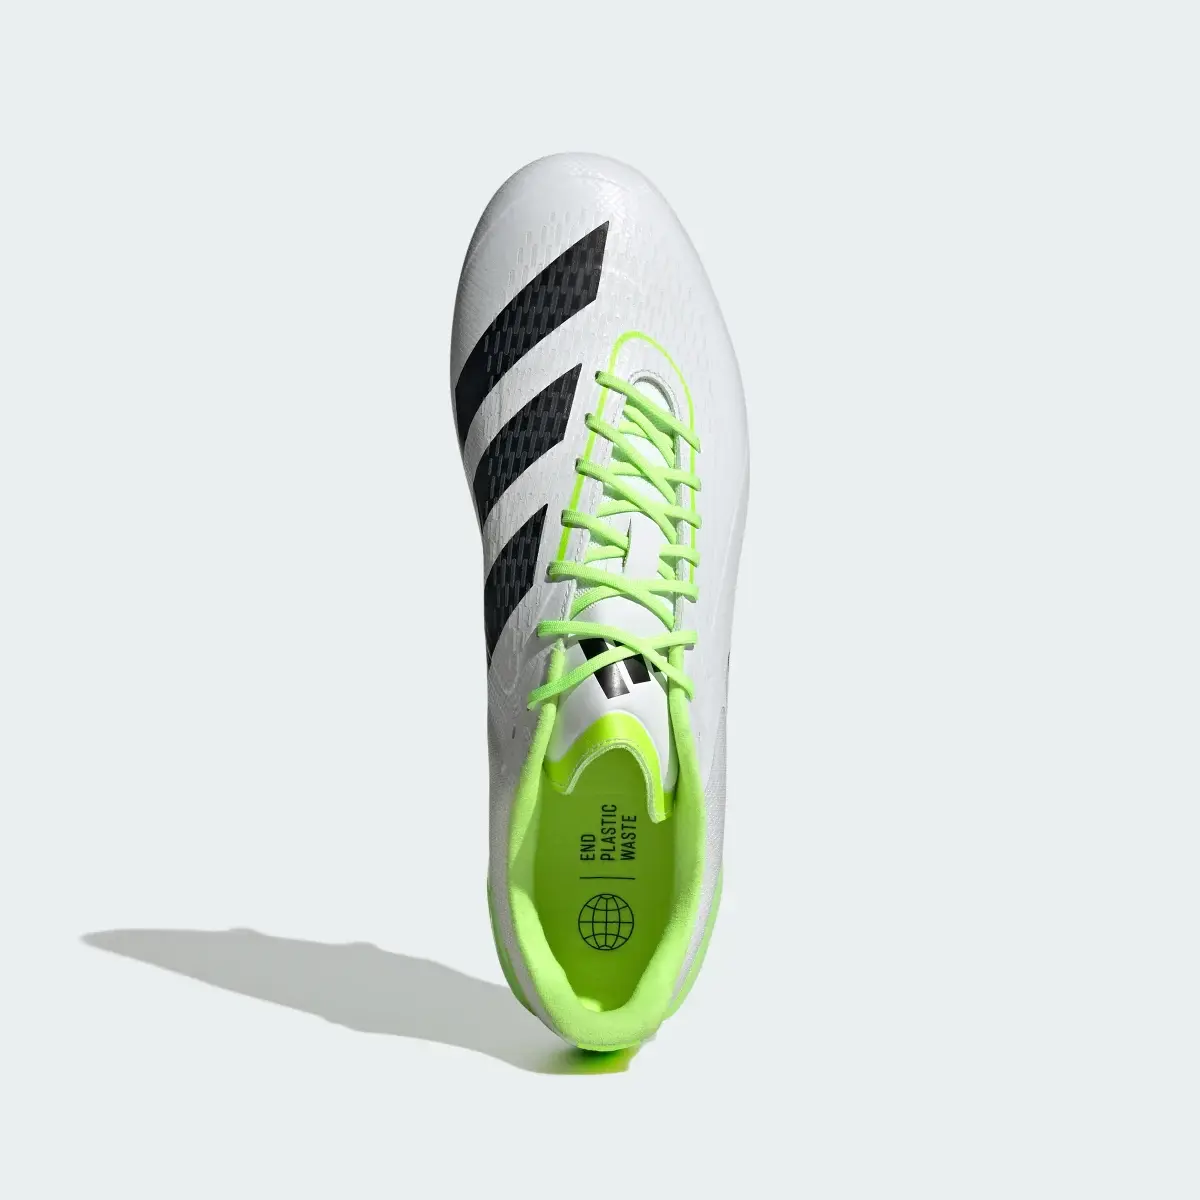 adidas RS-15 Ultimate Soft Ground Rugby Boots